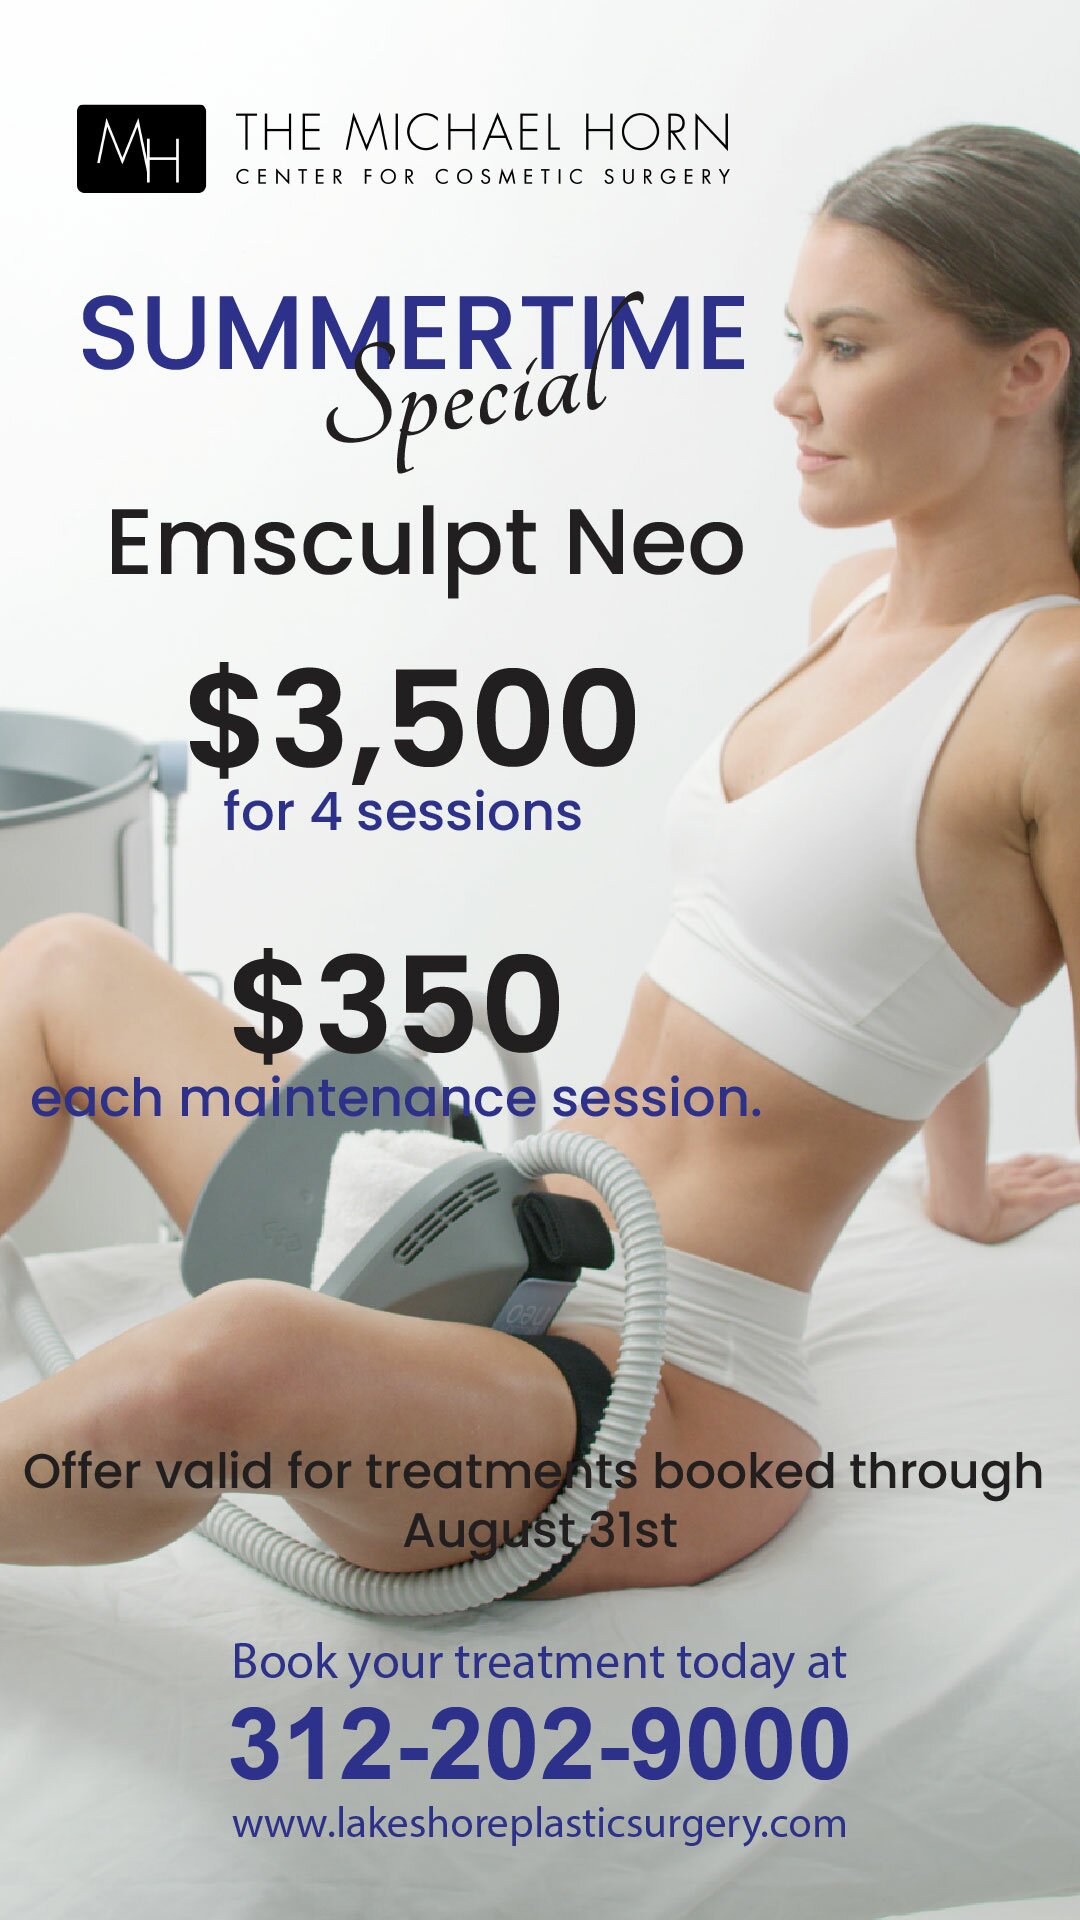 Special Offer - EmSculpt NEO - $3500 for 4 Sessions